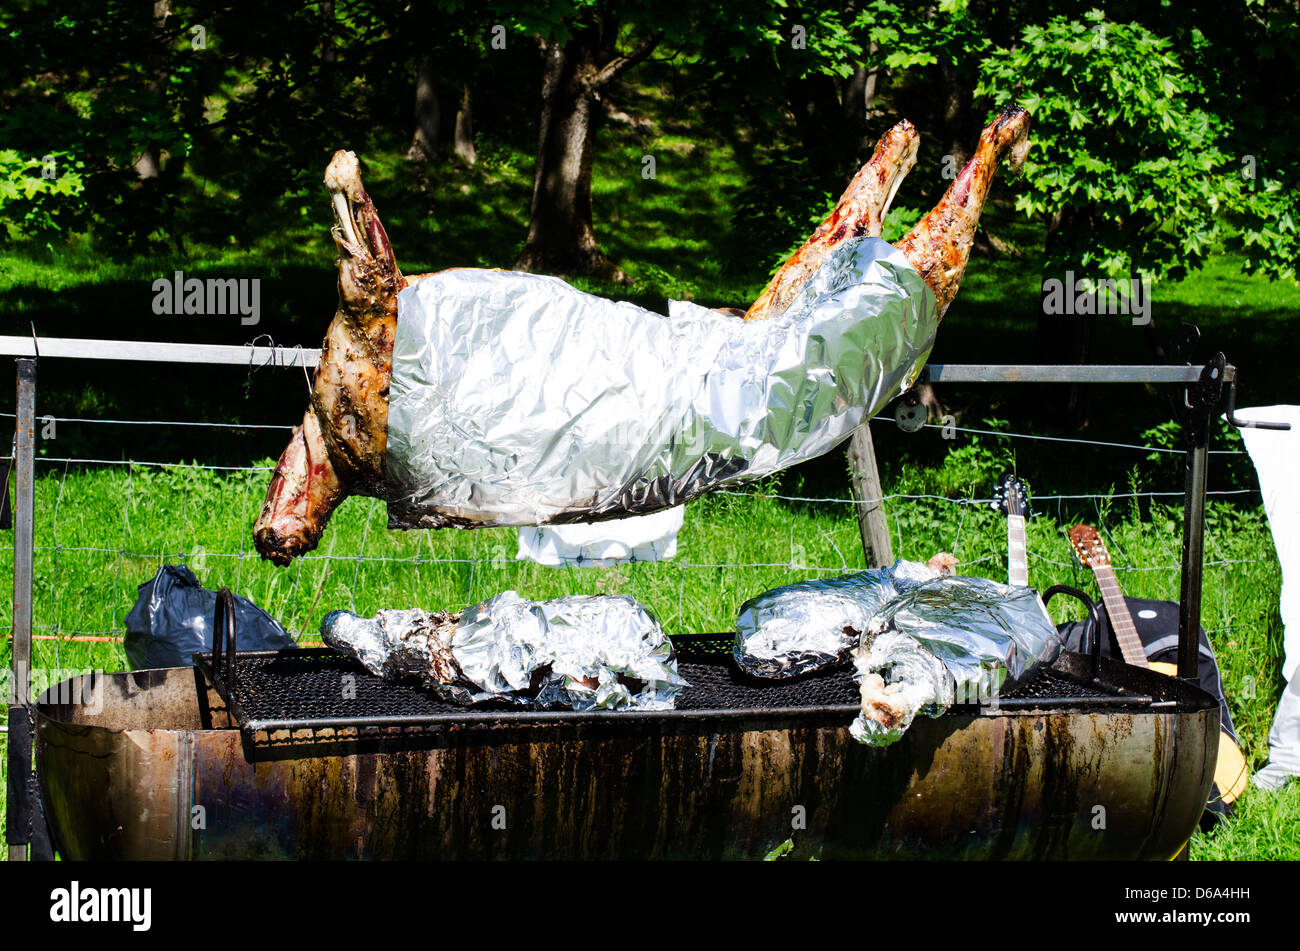 Whole roasted pig on a spit Stock Photo